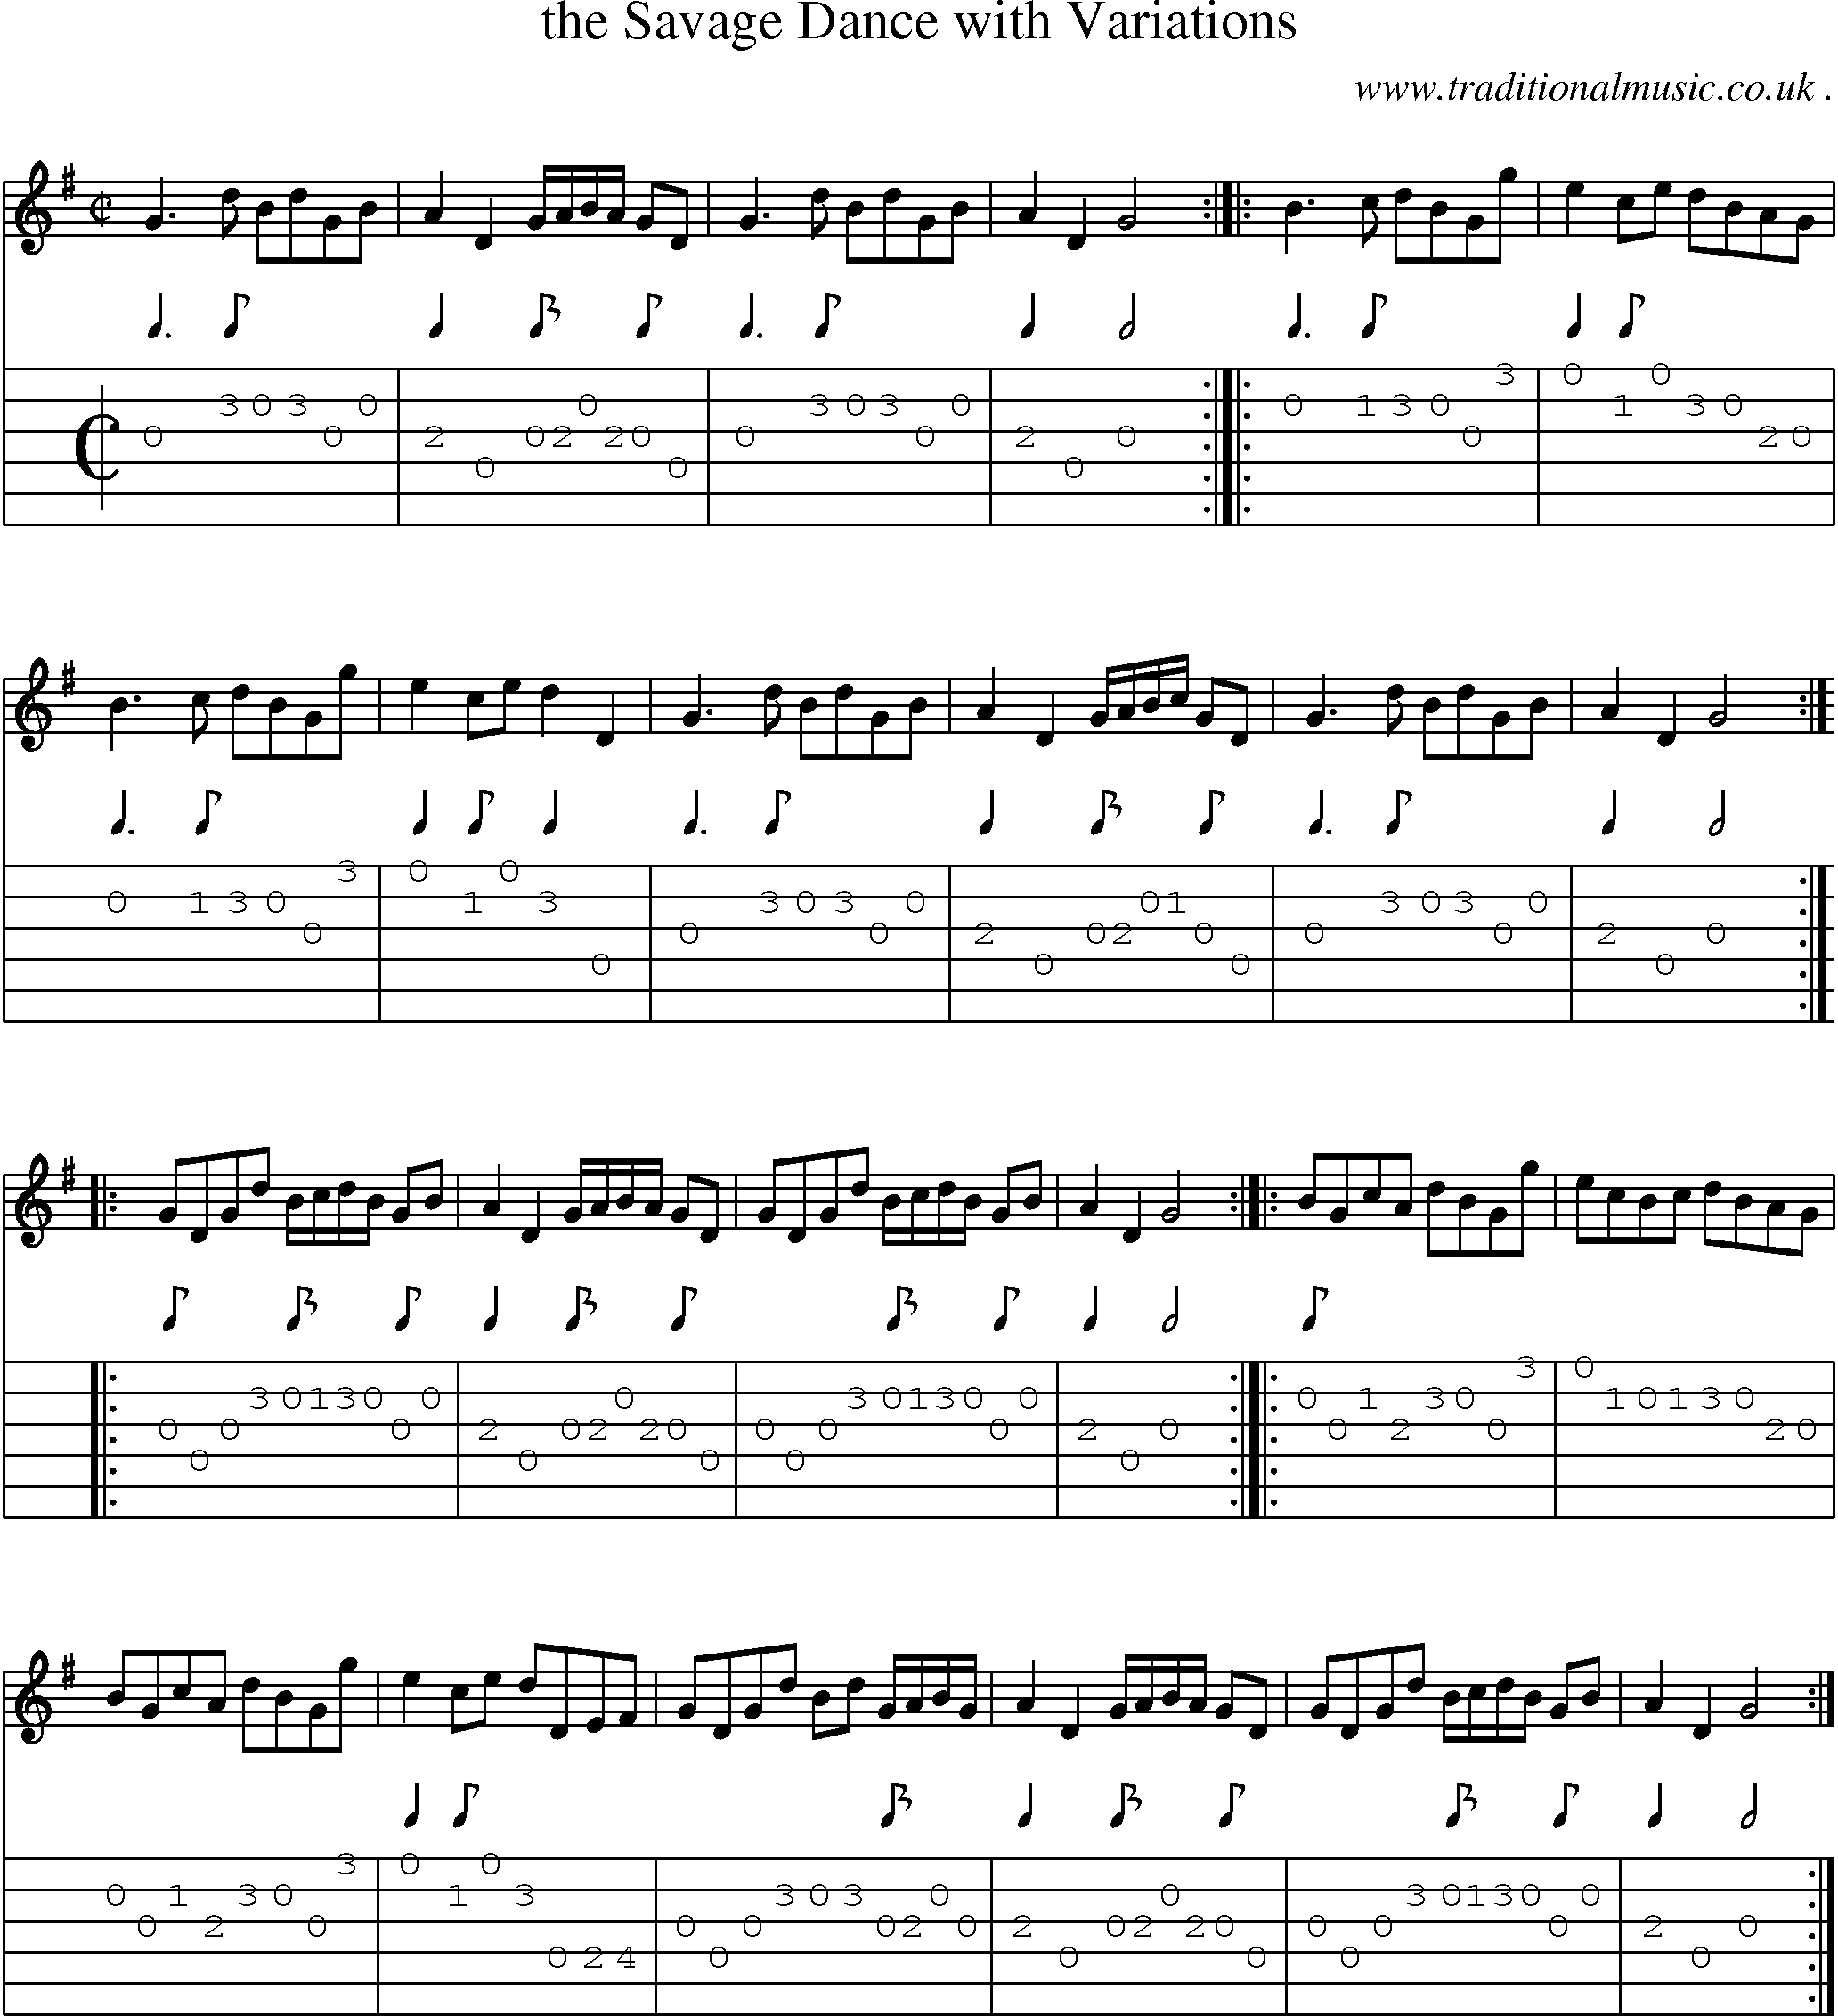 Sheet-Music and Guitar Tabs for The Savage Dance With Variations